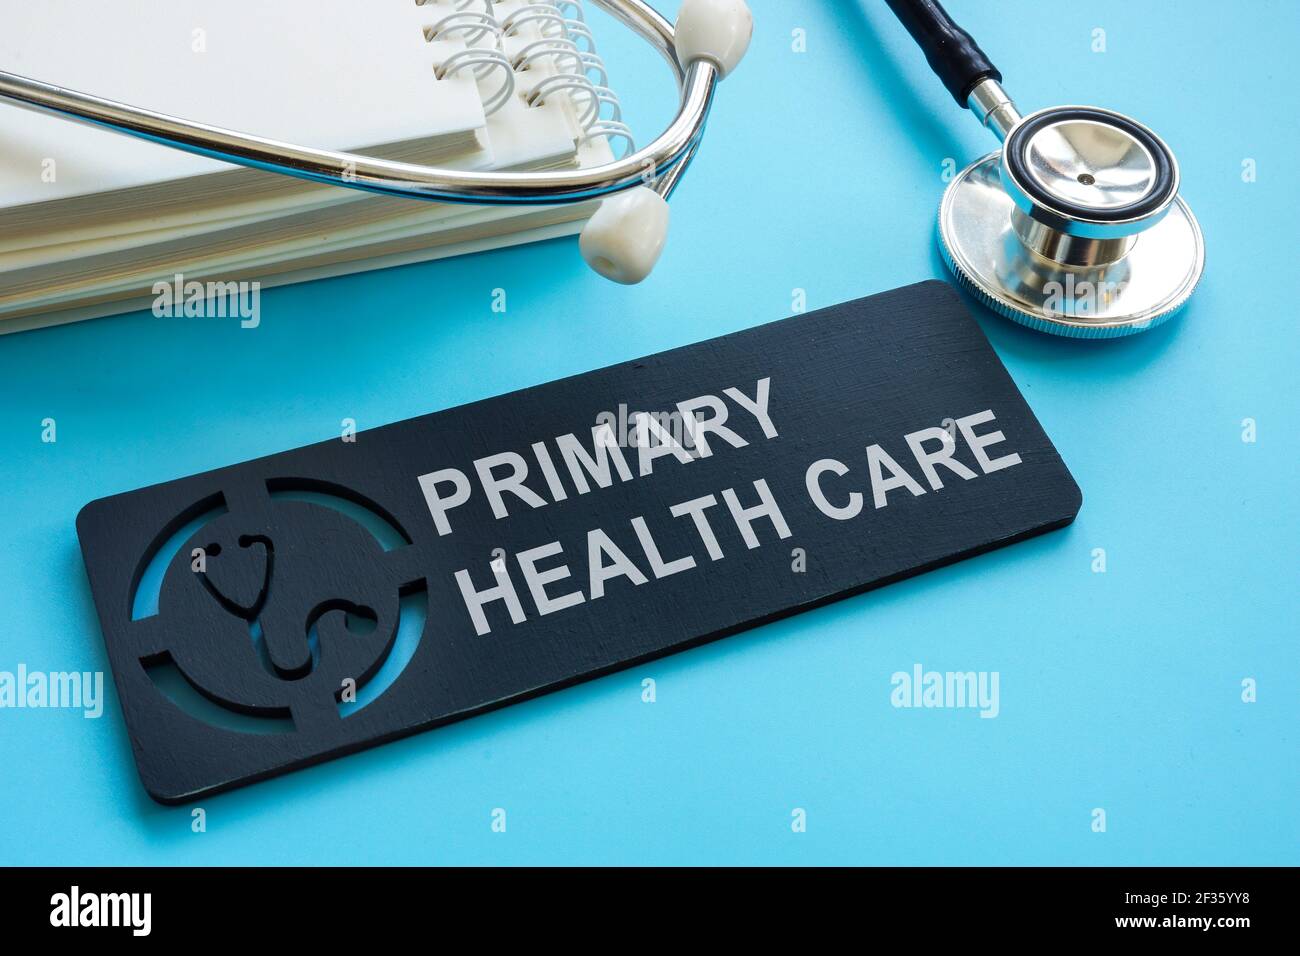 Primary health care sign with papers and stethoscope. Stock Photo